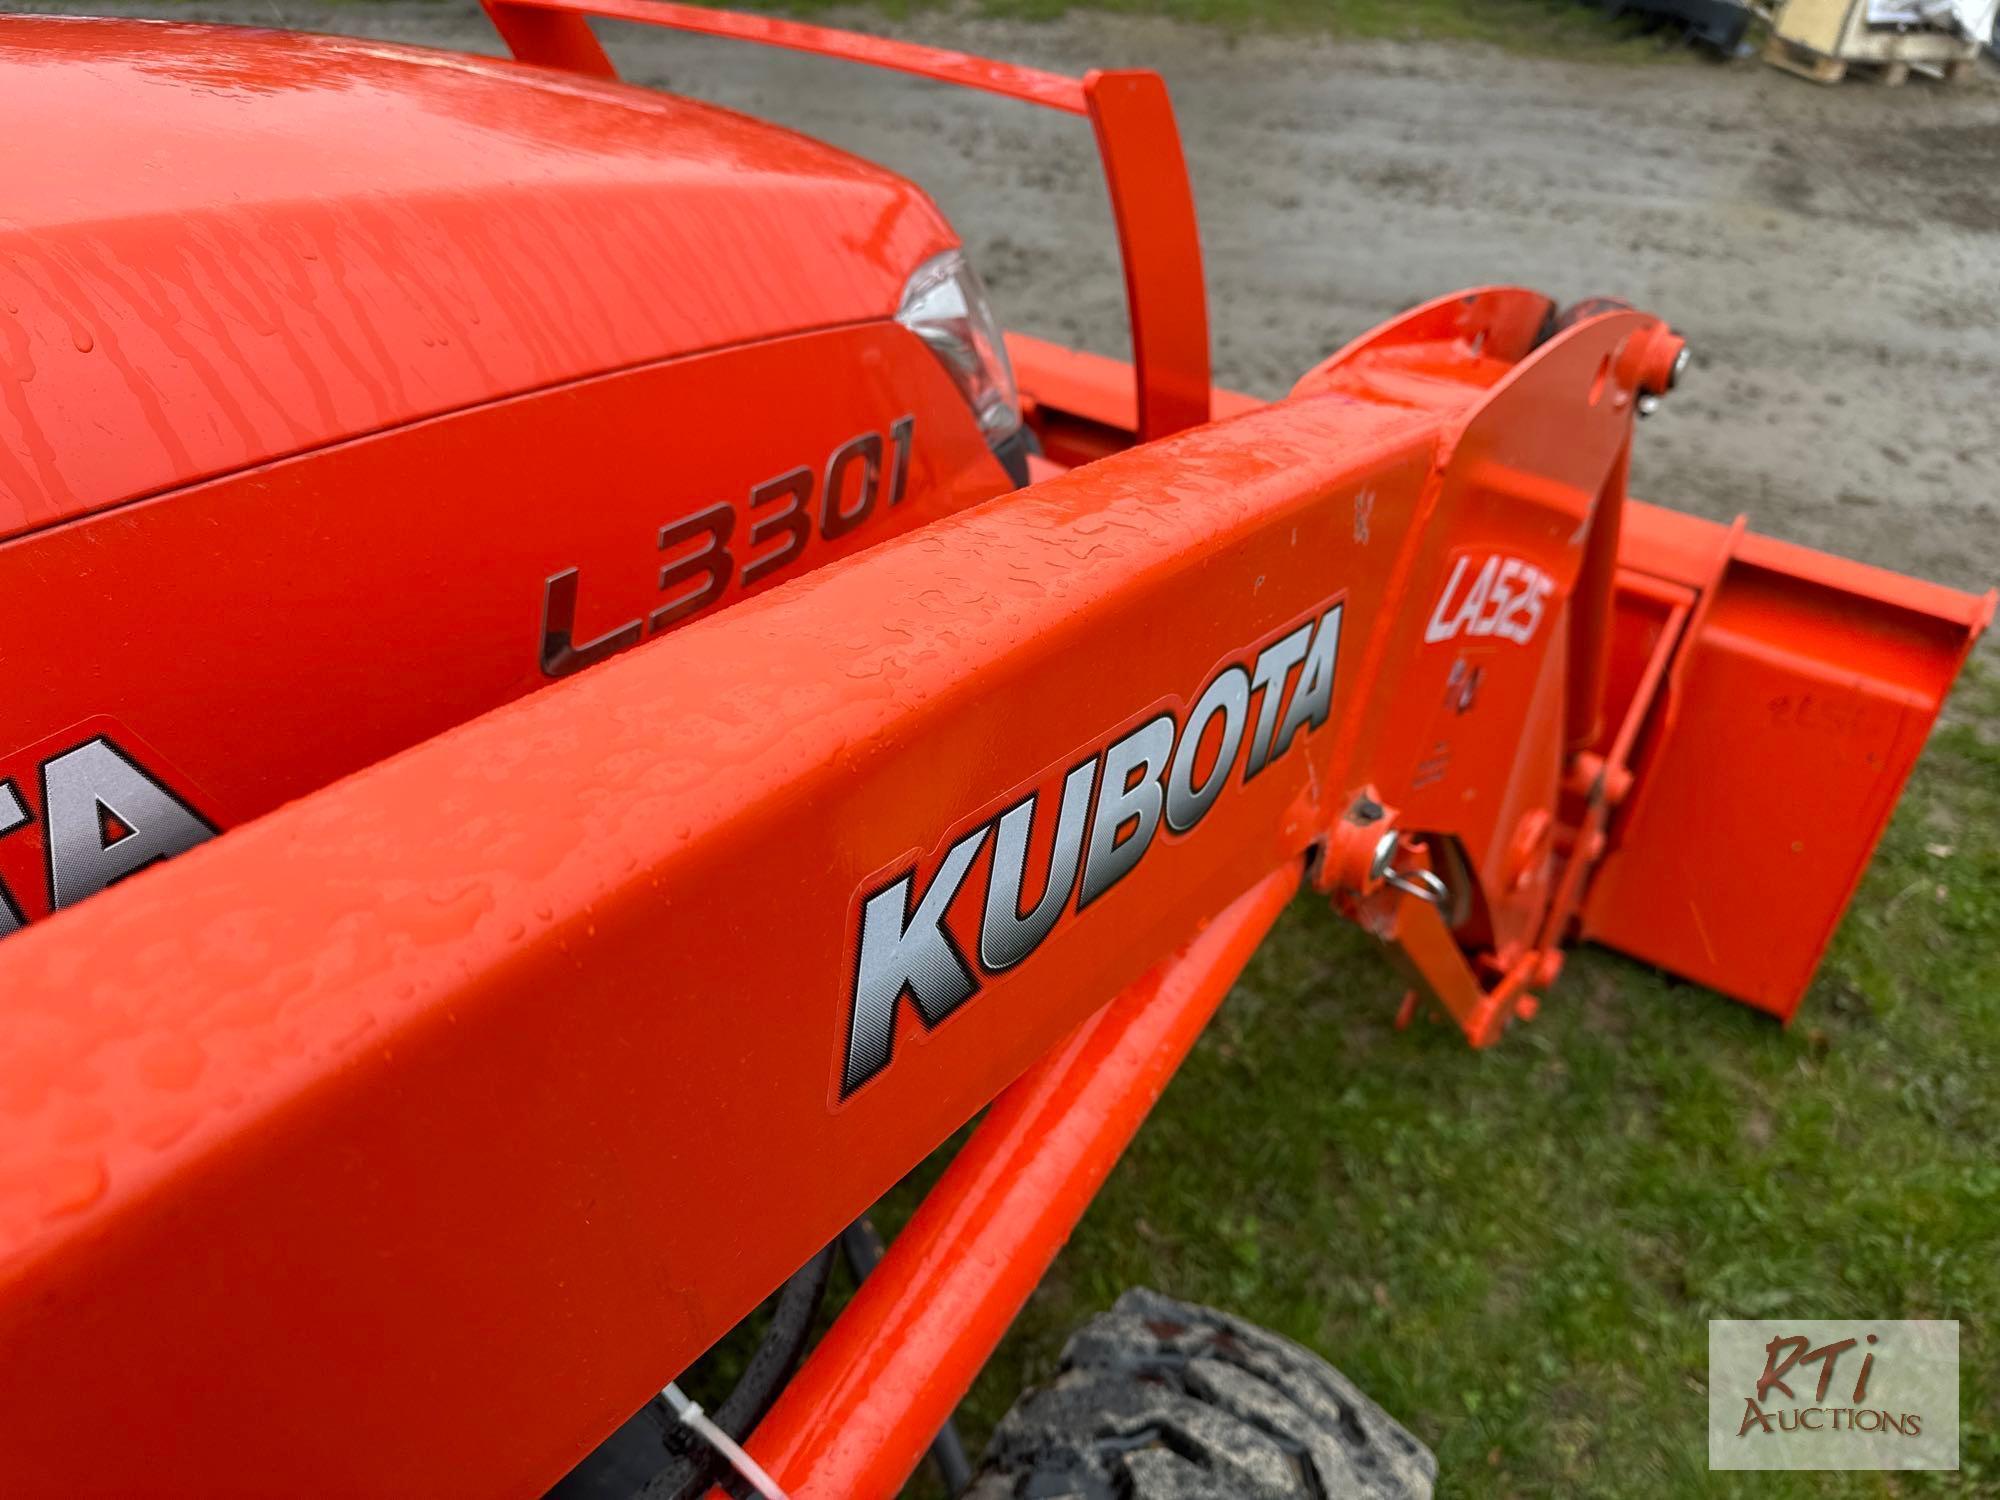 Kubota 3301 loader with R4 tires and quick attach bucket, 251 hrs.